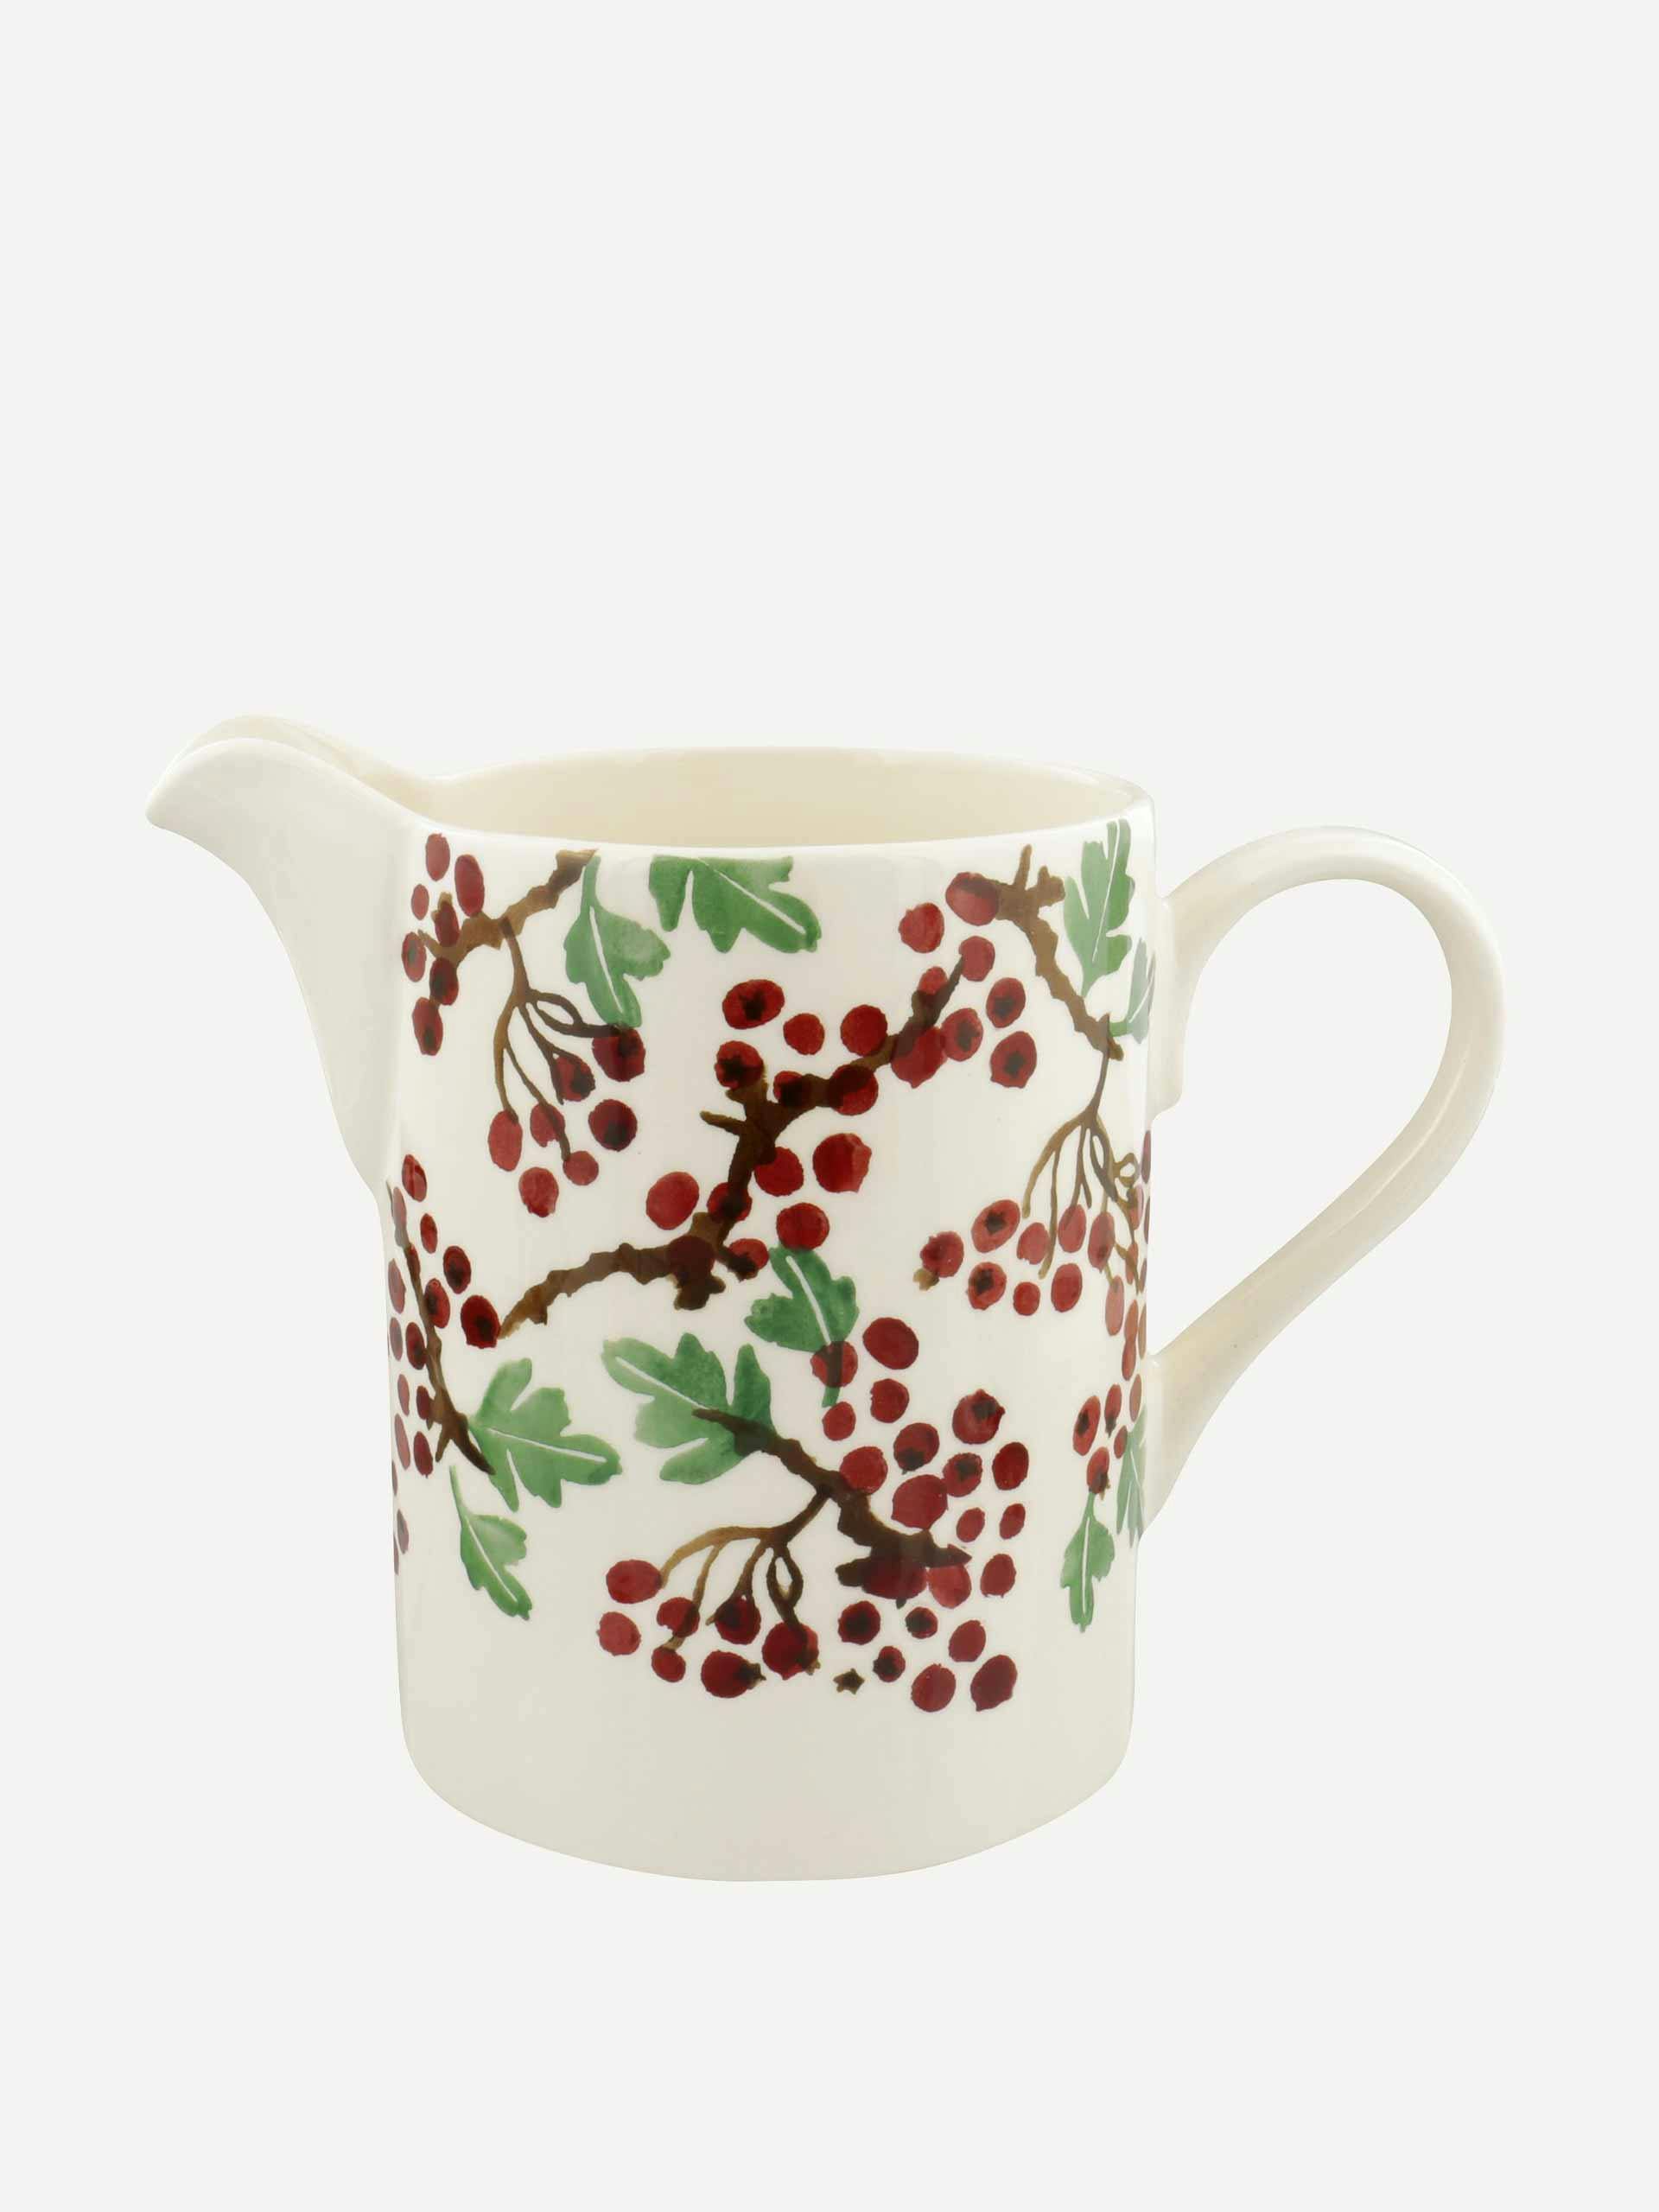 Red berry jug